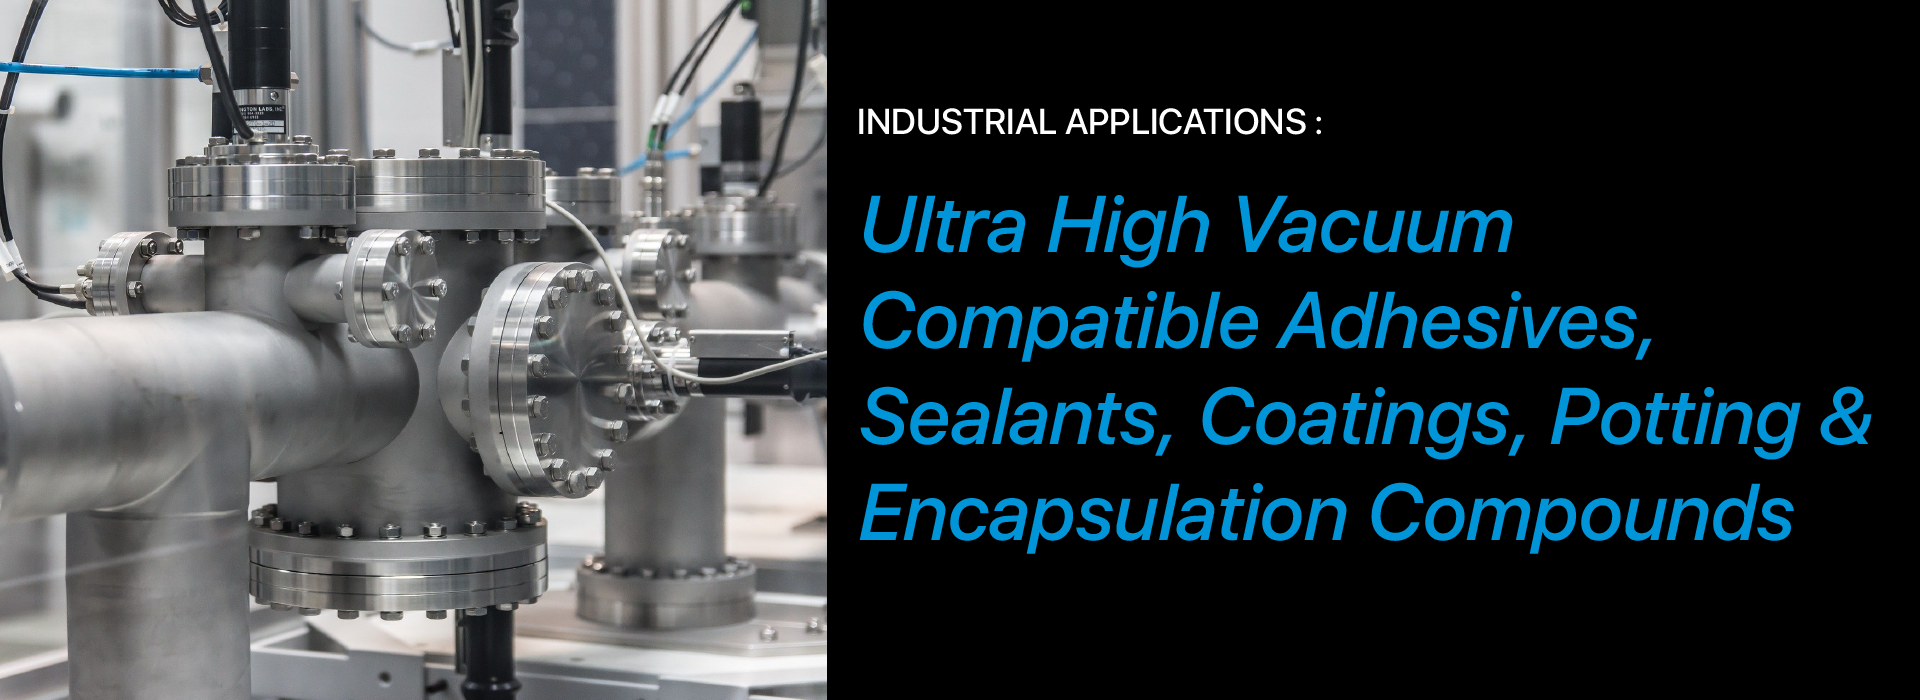 Ultra High Vacuum Compatible Adhesives, Sealants, Coatings, Potting and Encapsulation Compounds


